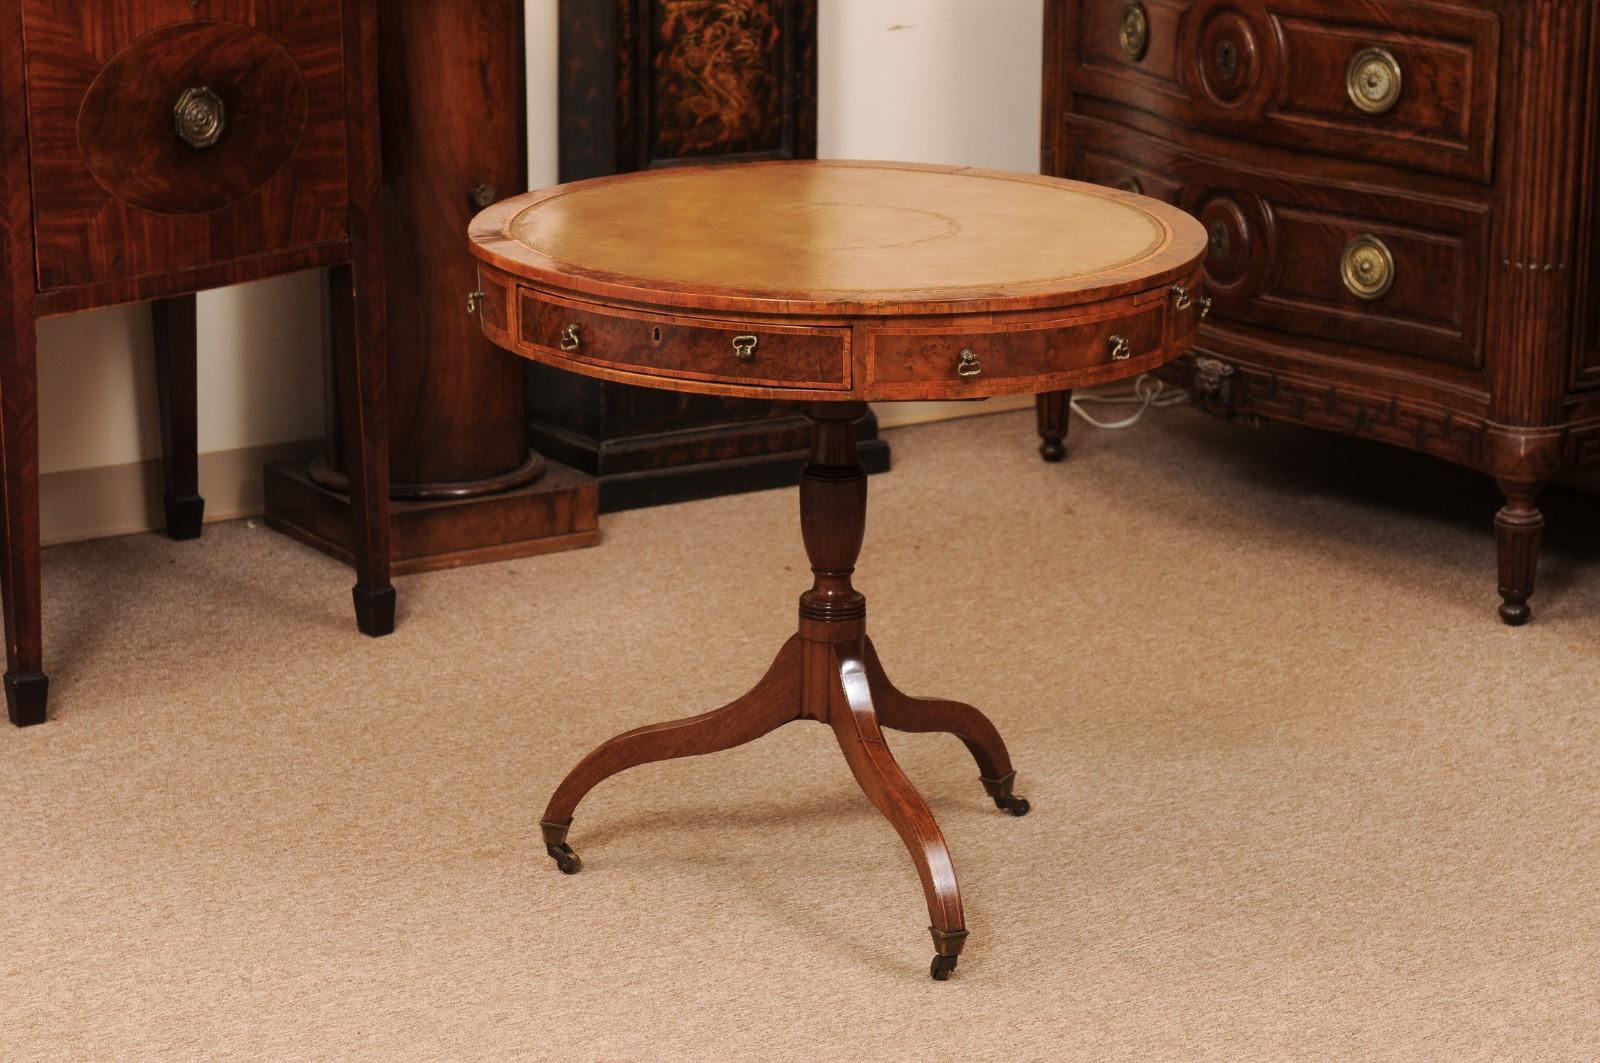 18th Century English Small Mulberry Drum Table with Inlay & Leather Top For Sale 3